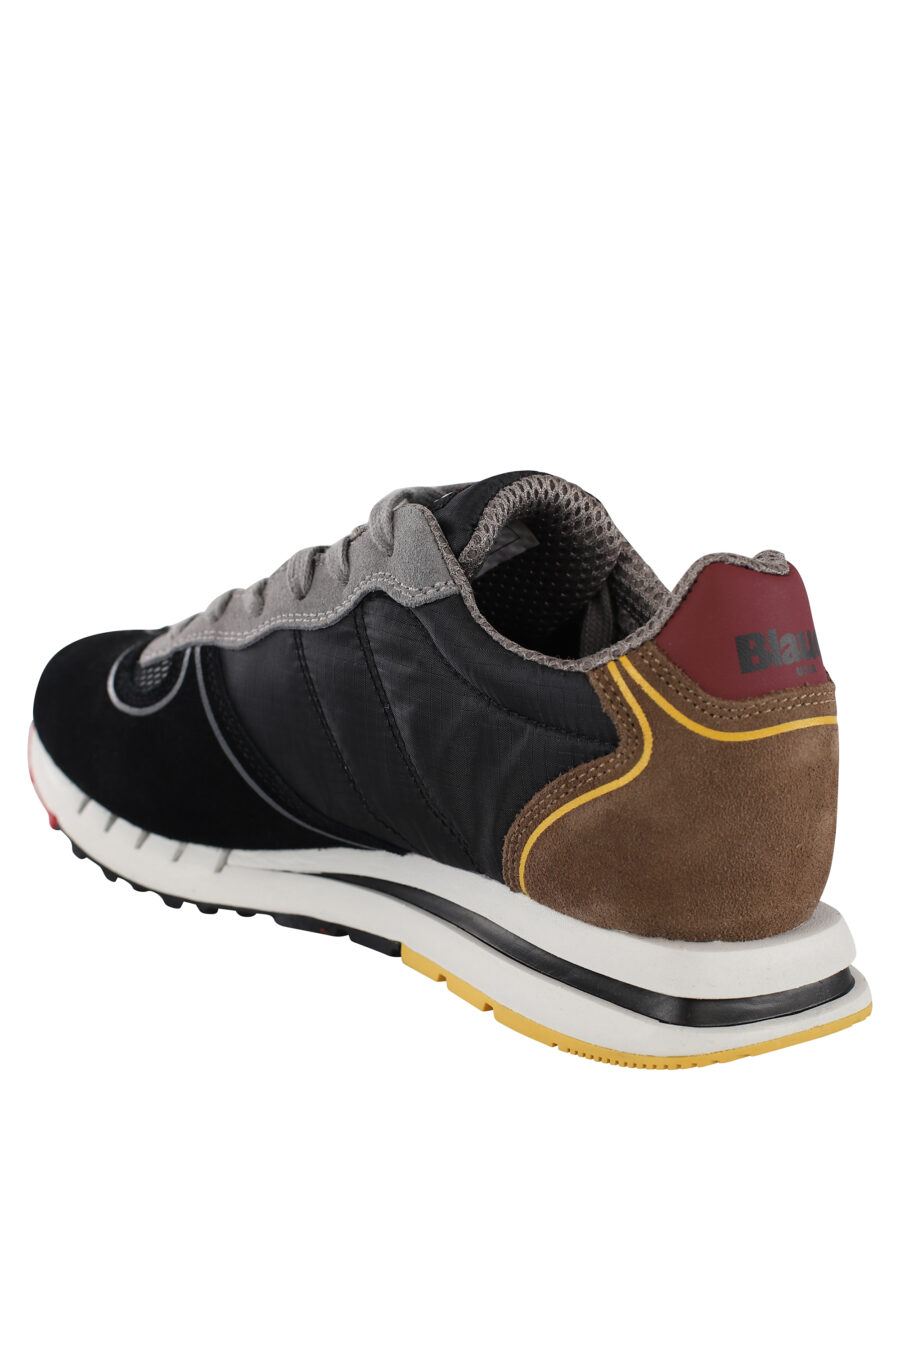 Trainers "quartz" black multicoloured with breathable mesh - IMG 6820